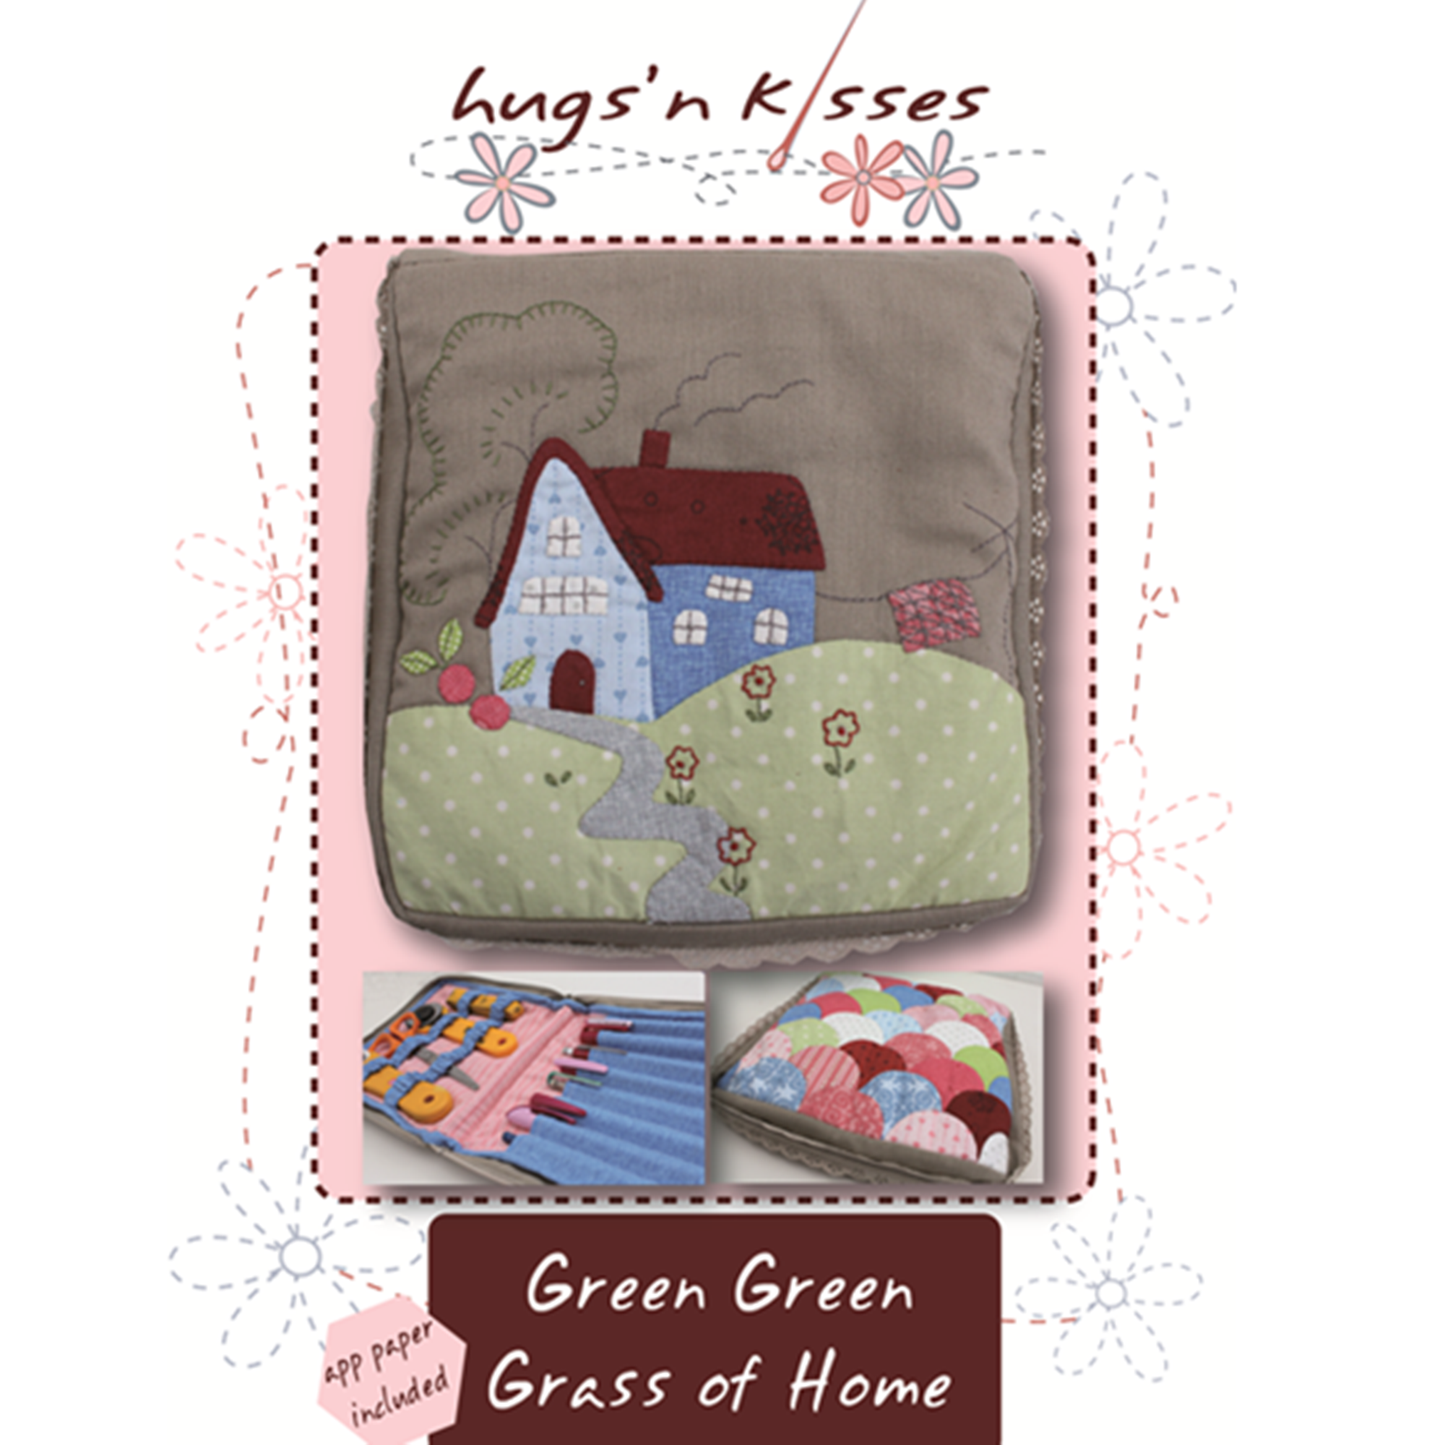 Green Green Grass of Home Sewing supplies bag English Paper Pieced embroidery Hugs 'N Kisses pattern